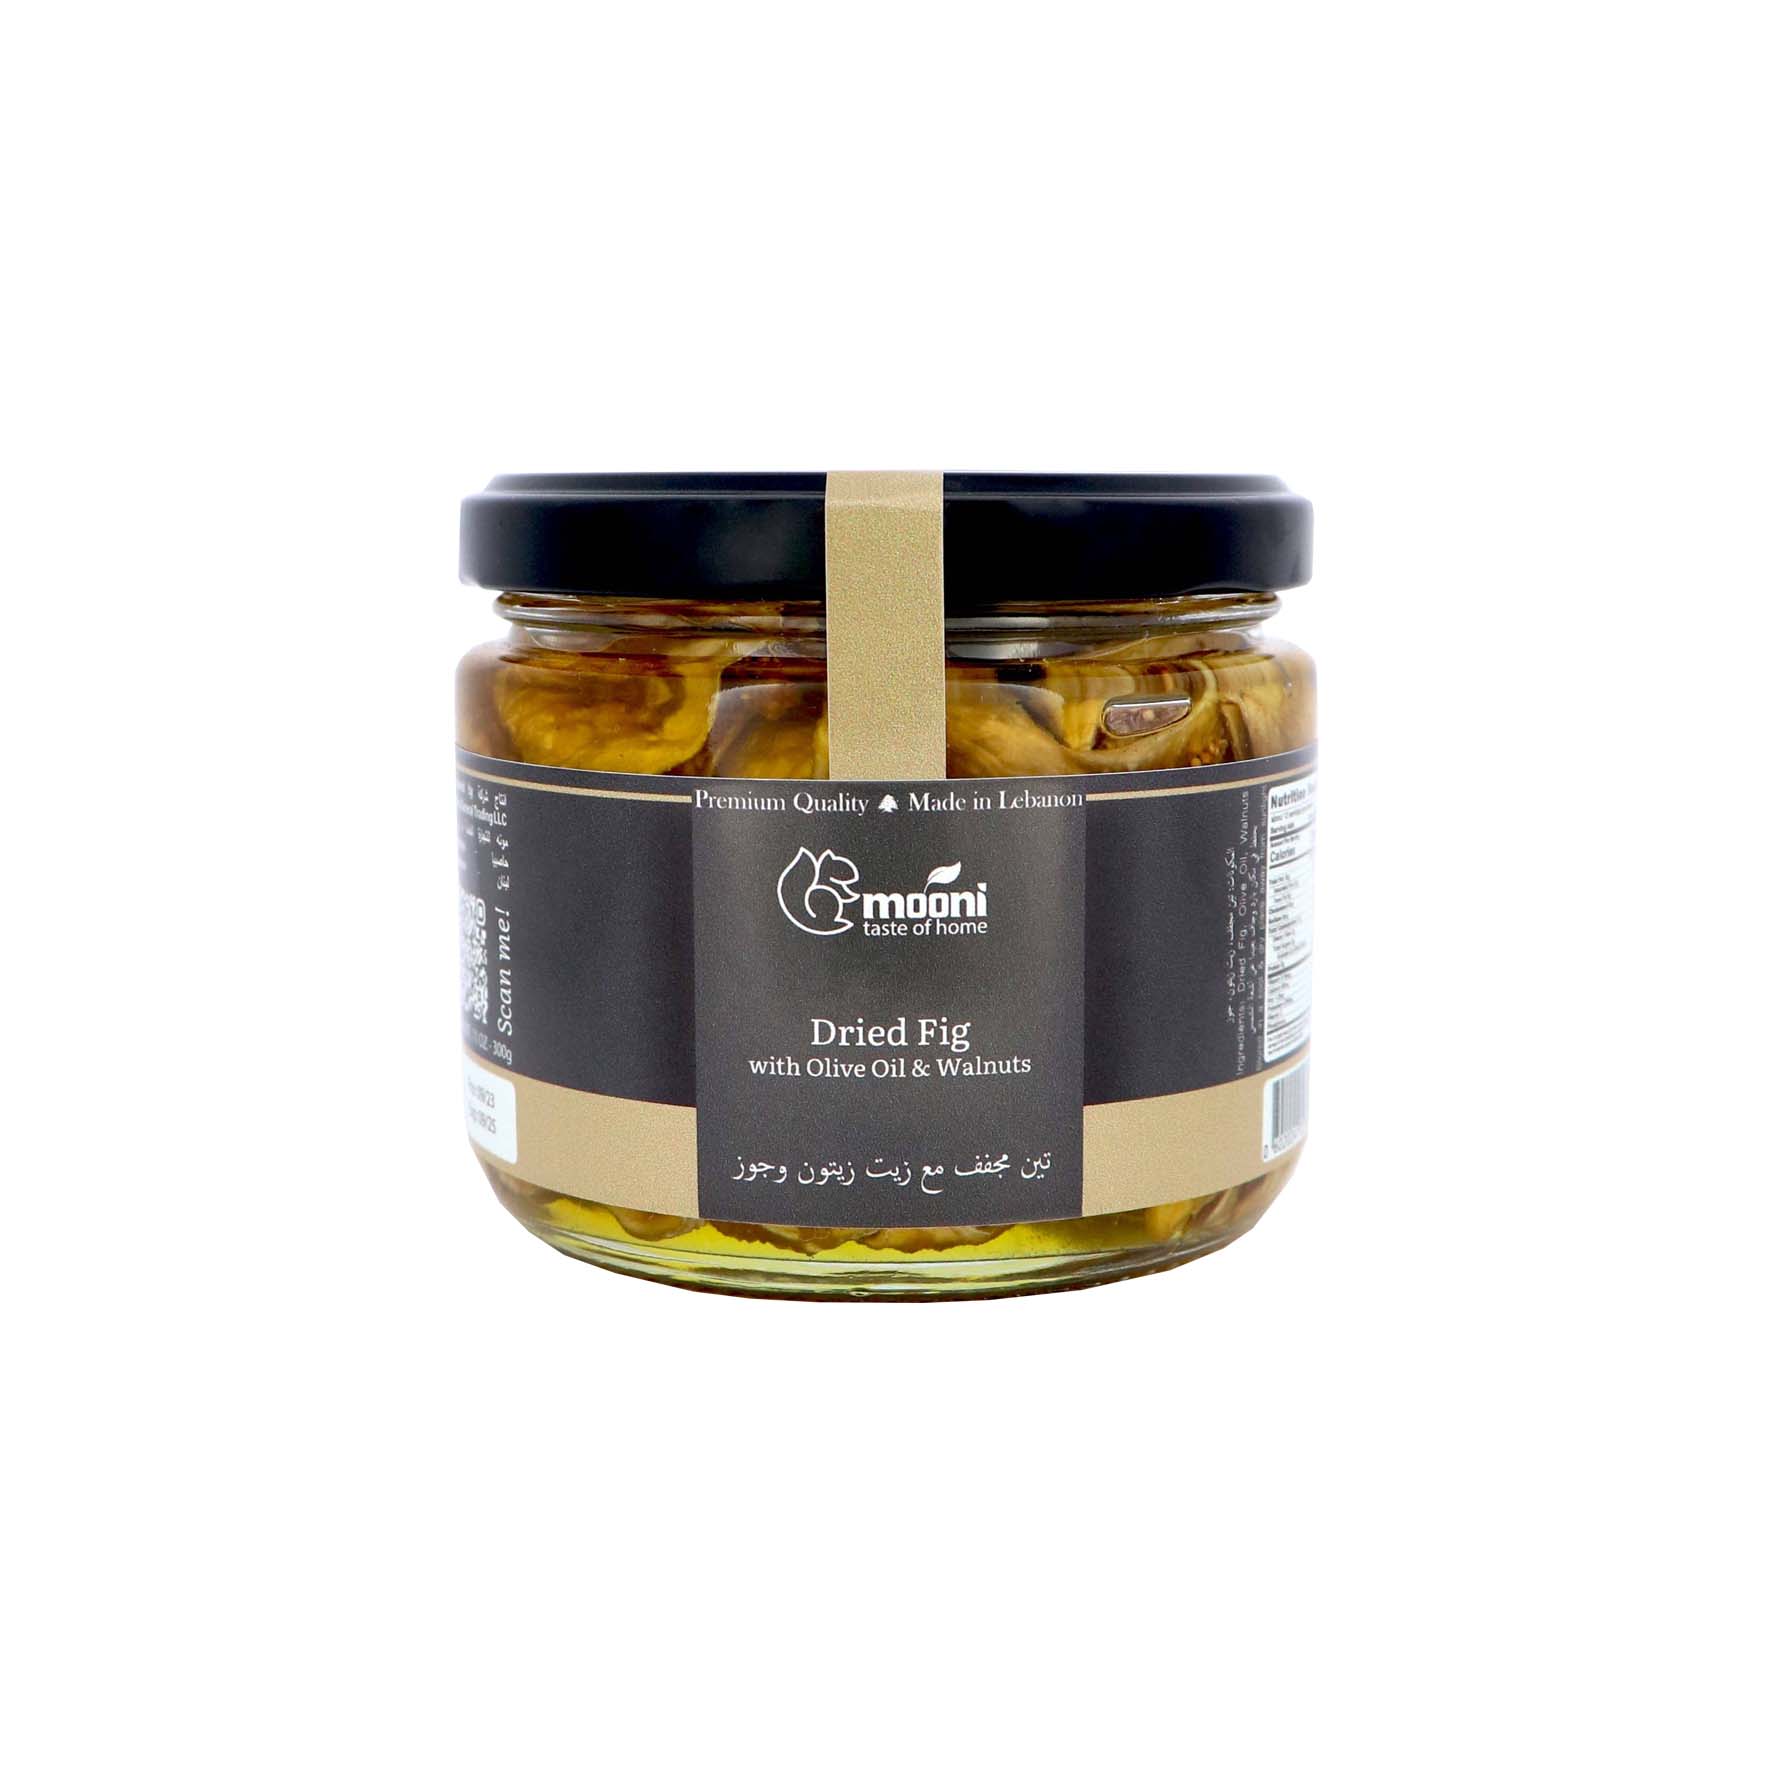 Dried Fig with Olive Oil & Walnuts – 300g